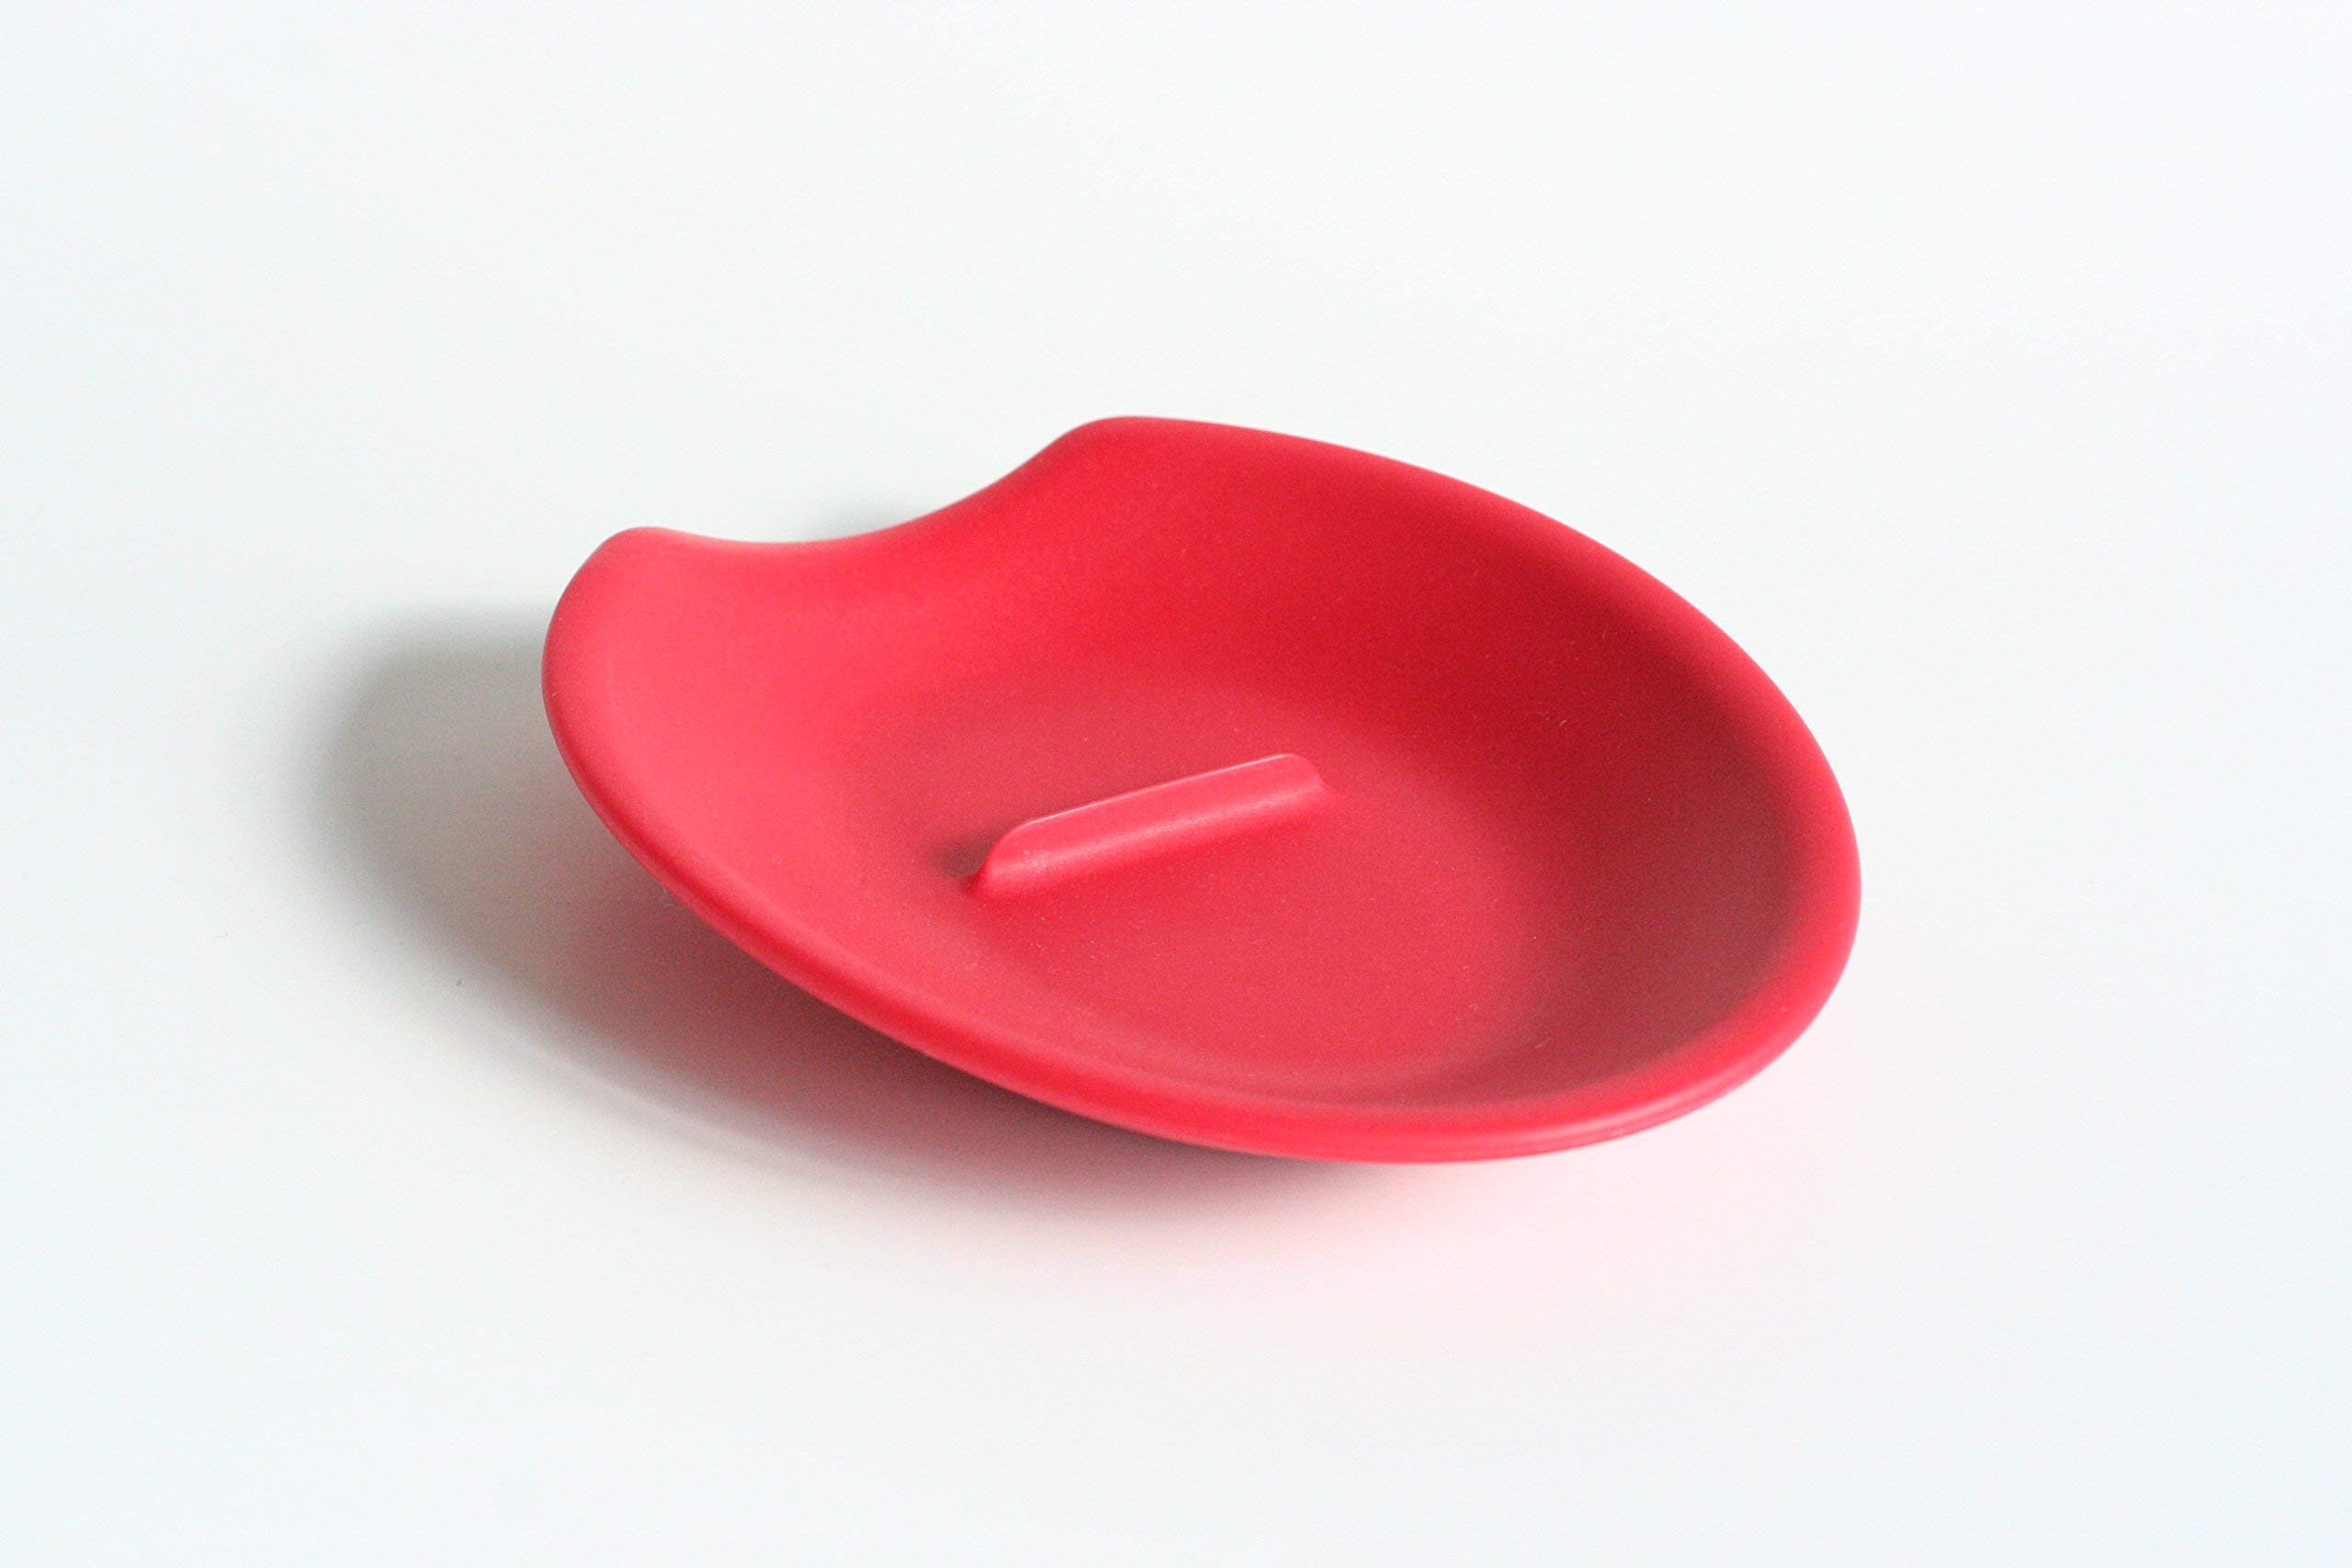 Crack'em Egg Cracker & Spoon Rest (Candy Apple Red) - Perfectly Cracks Eggs & Contains Messes - Easy to Use & Clean - Great for Kids - Prevents Broken Yolks